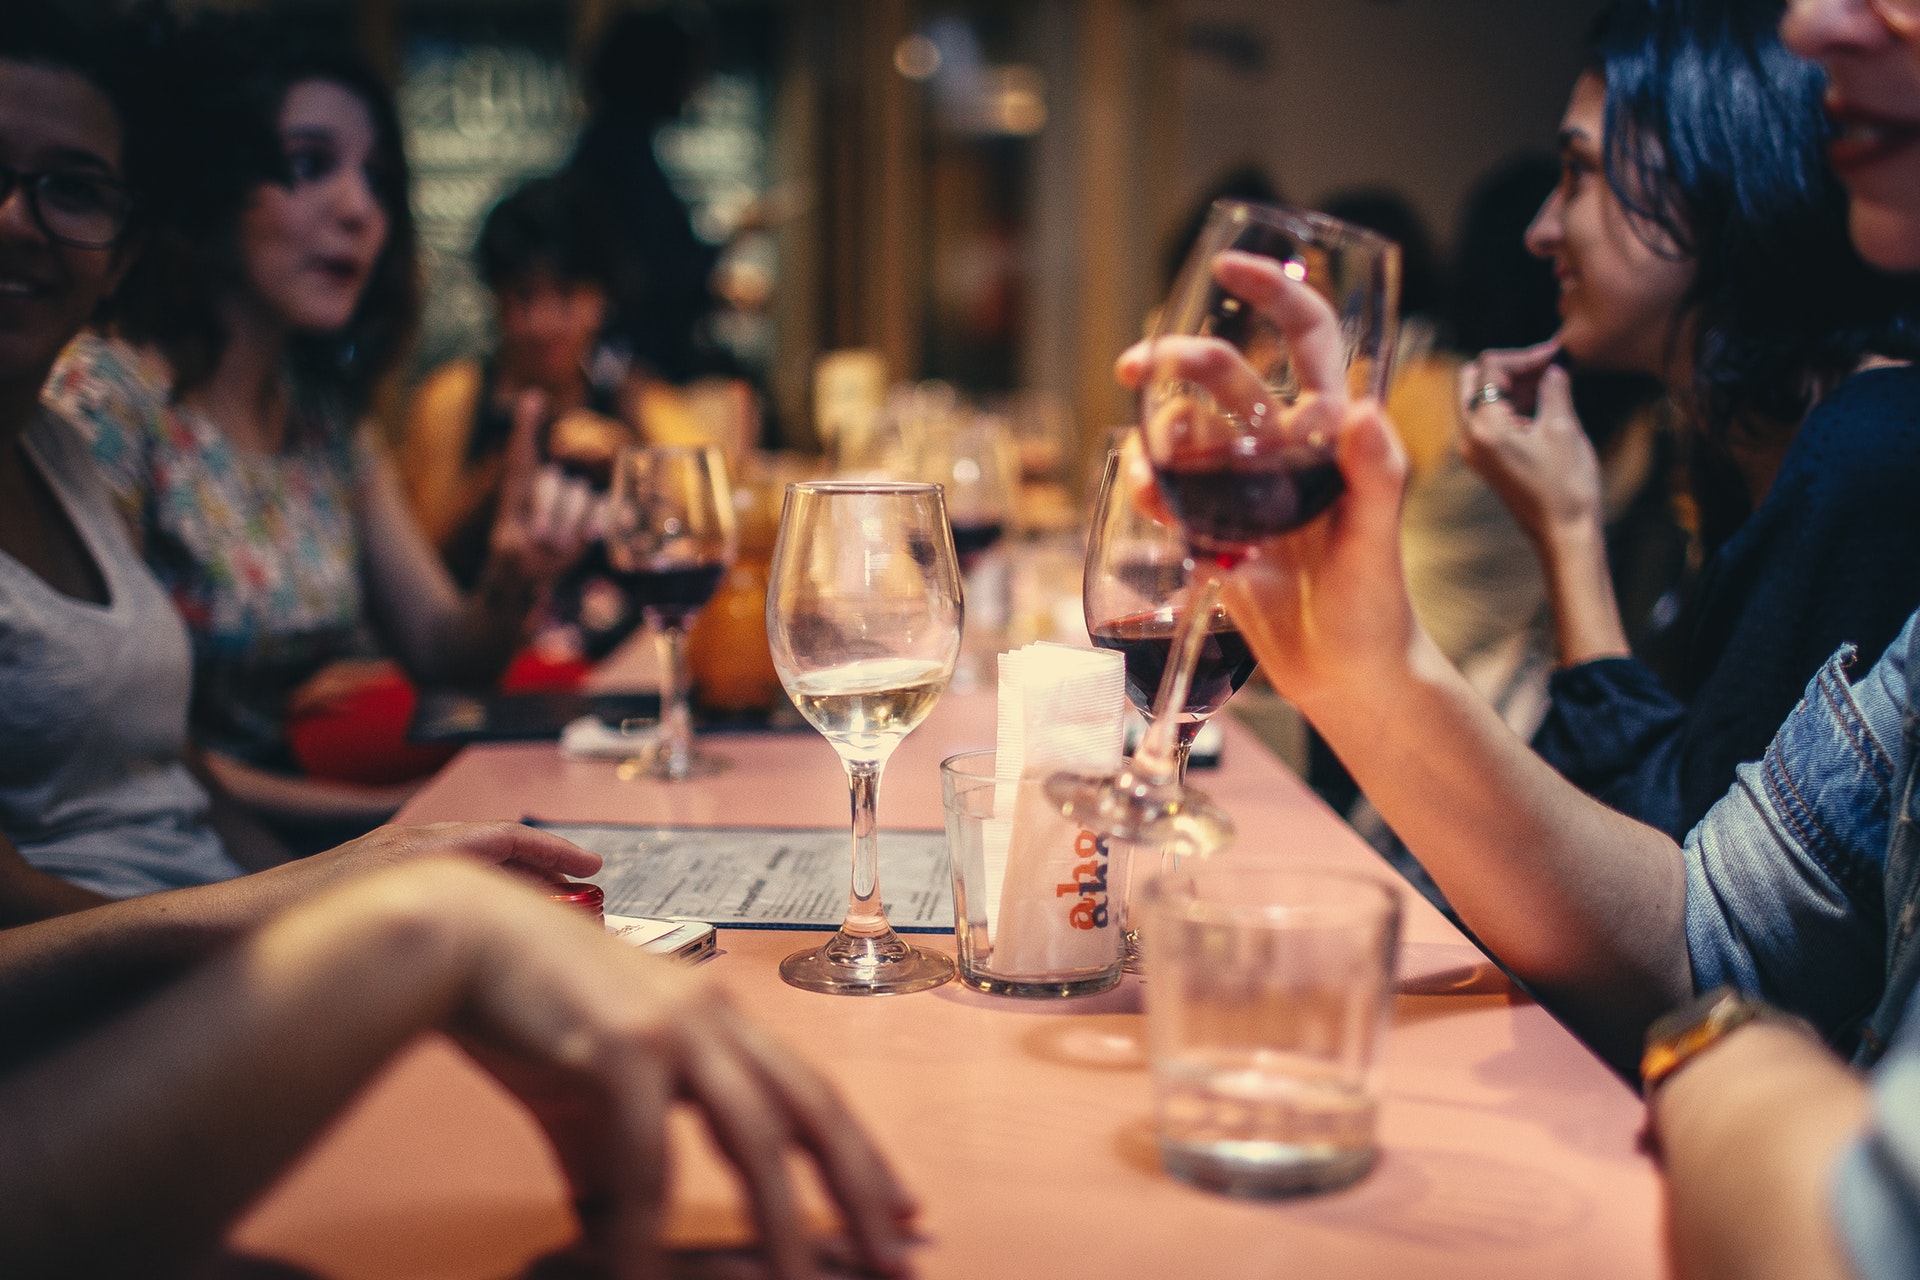 Group of single women drinking wine at a restaurant